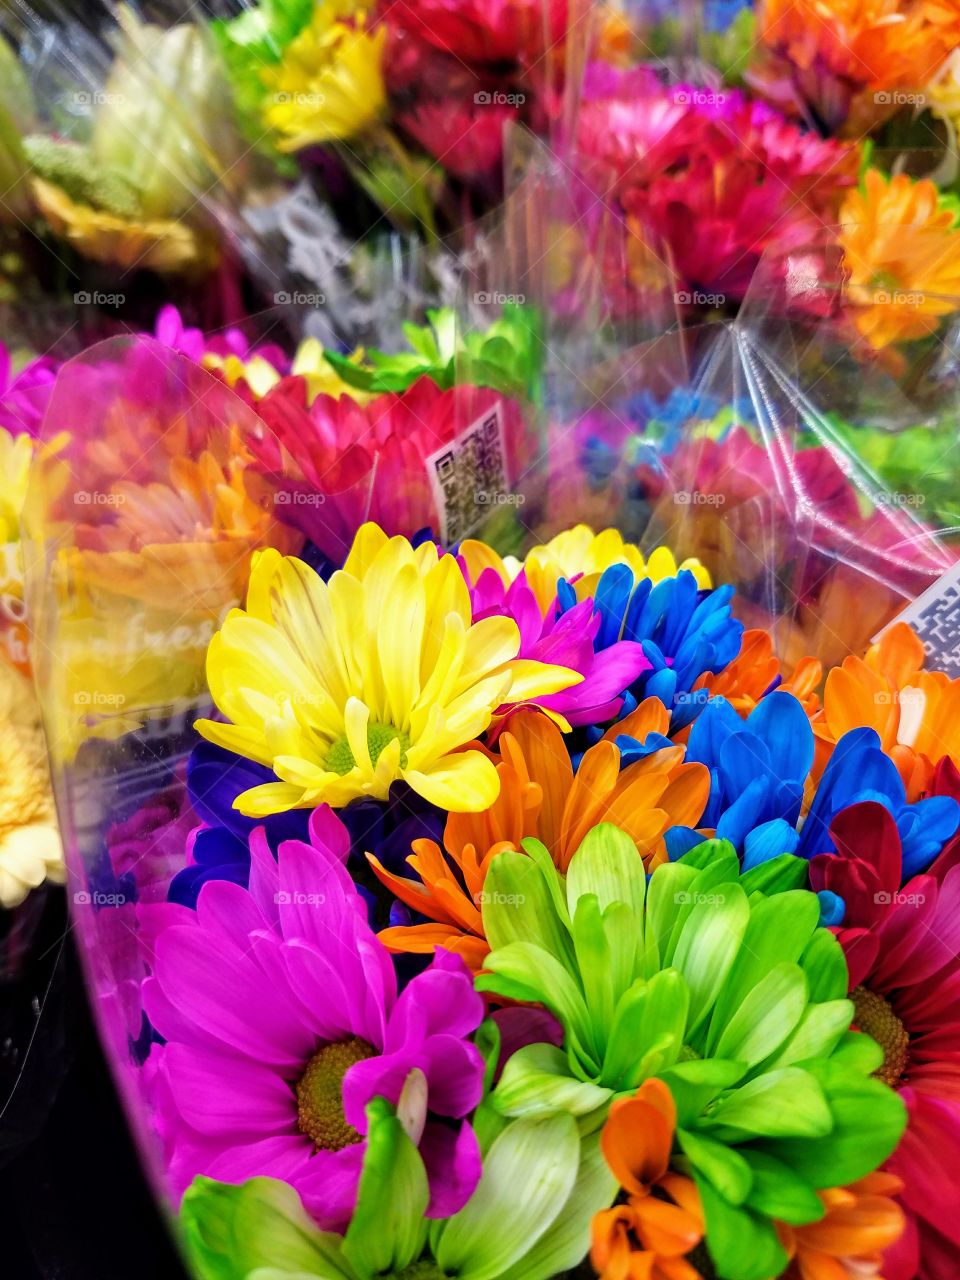 Colorful bouquets of daisy flowers